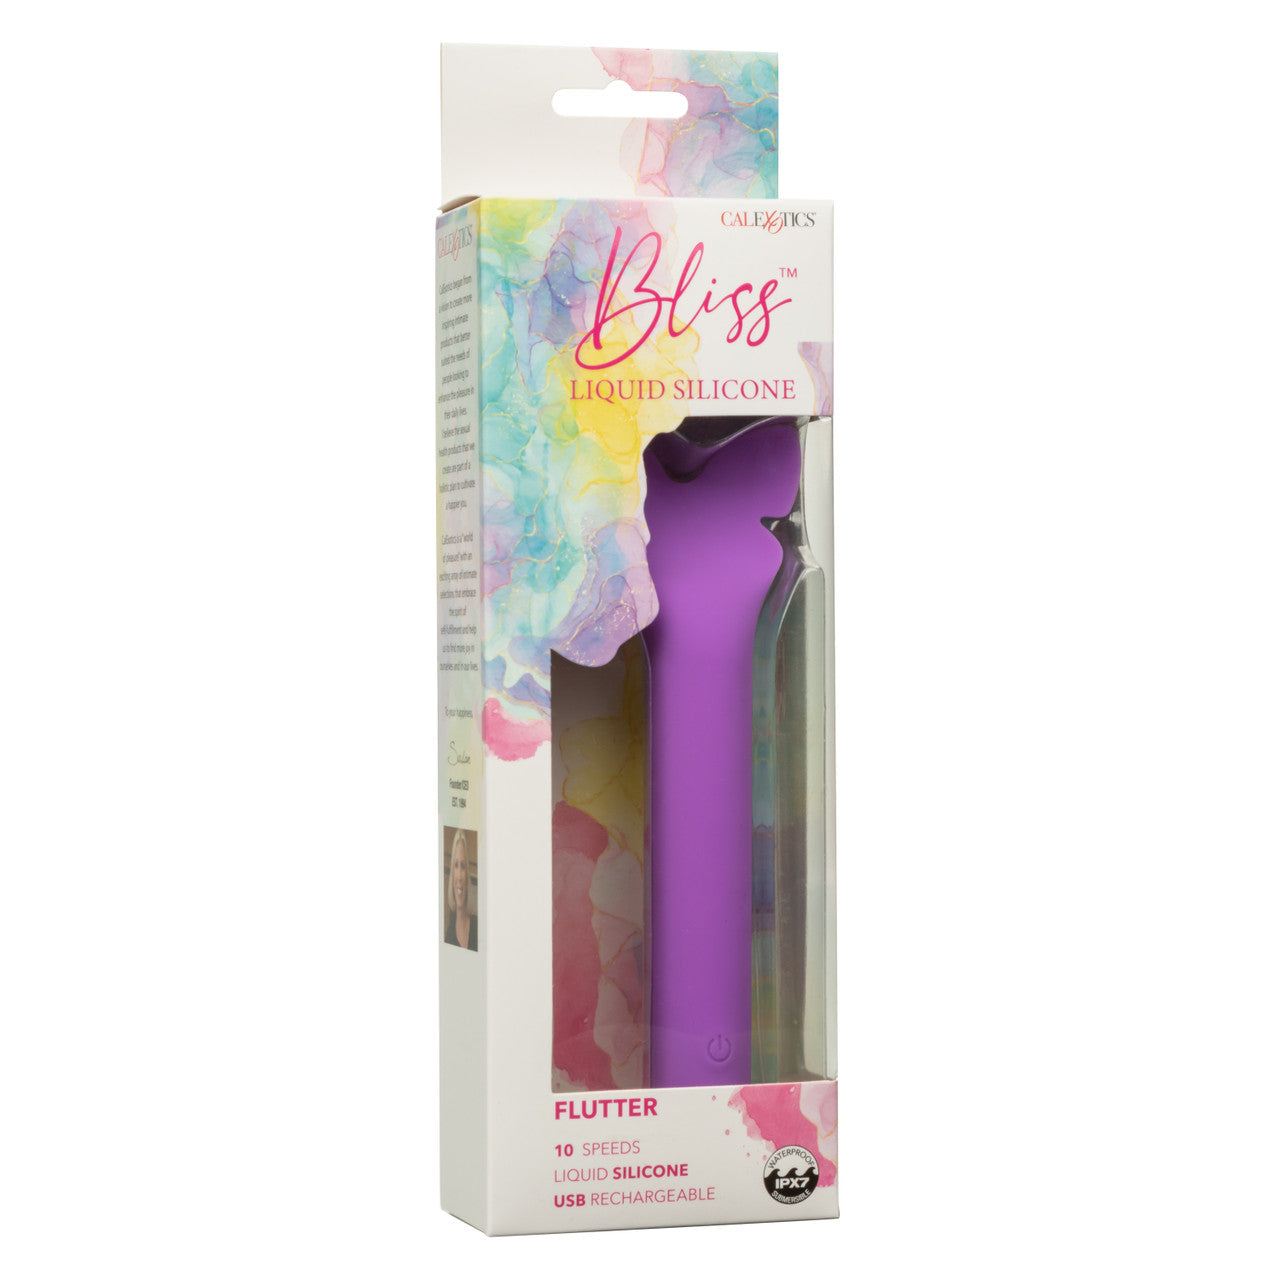 Bliss Liquid Silicone Flutter Vibe